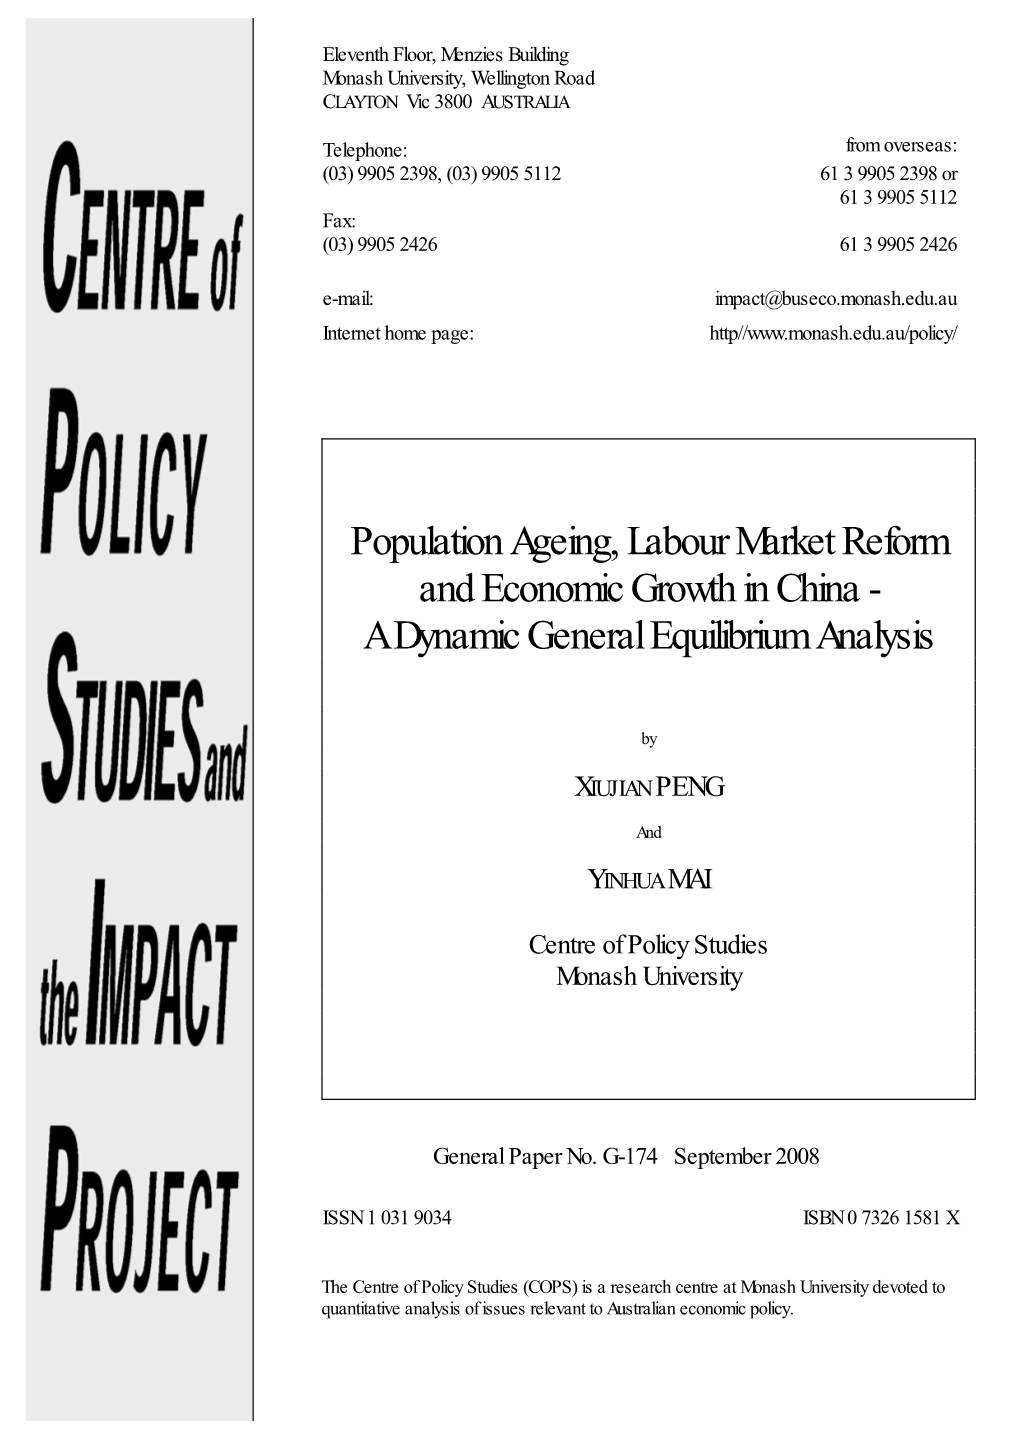 Population Ageing, Labour Market Reform and Economic Growth in China - a Dynamic General Equilibrium Analysis